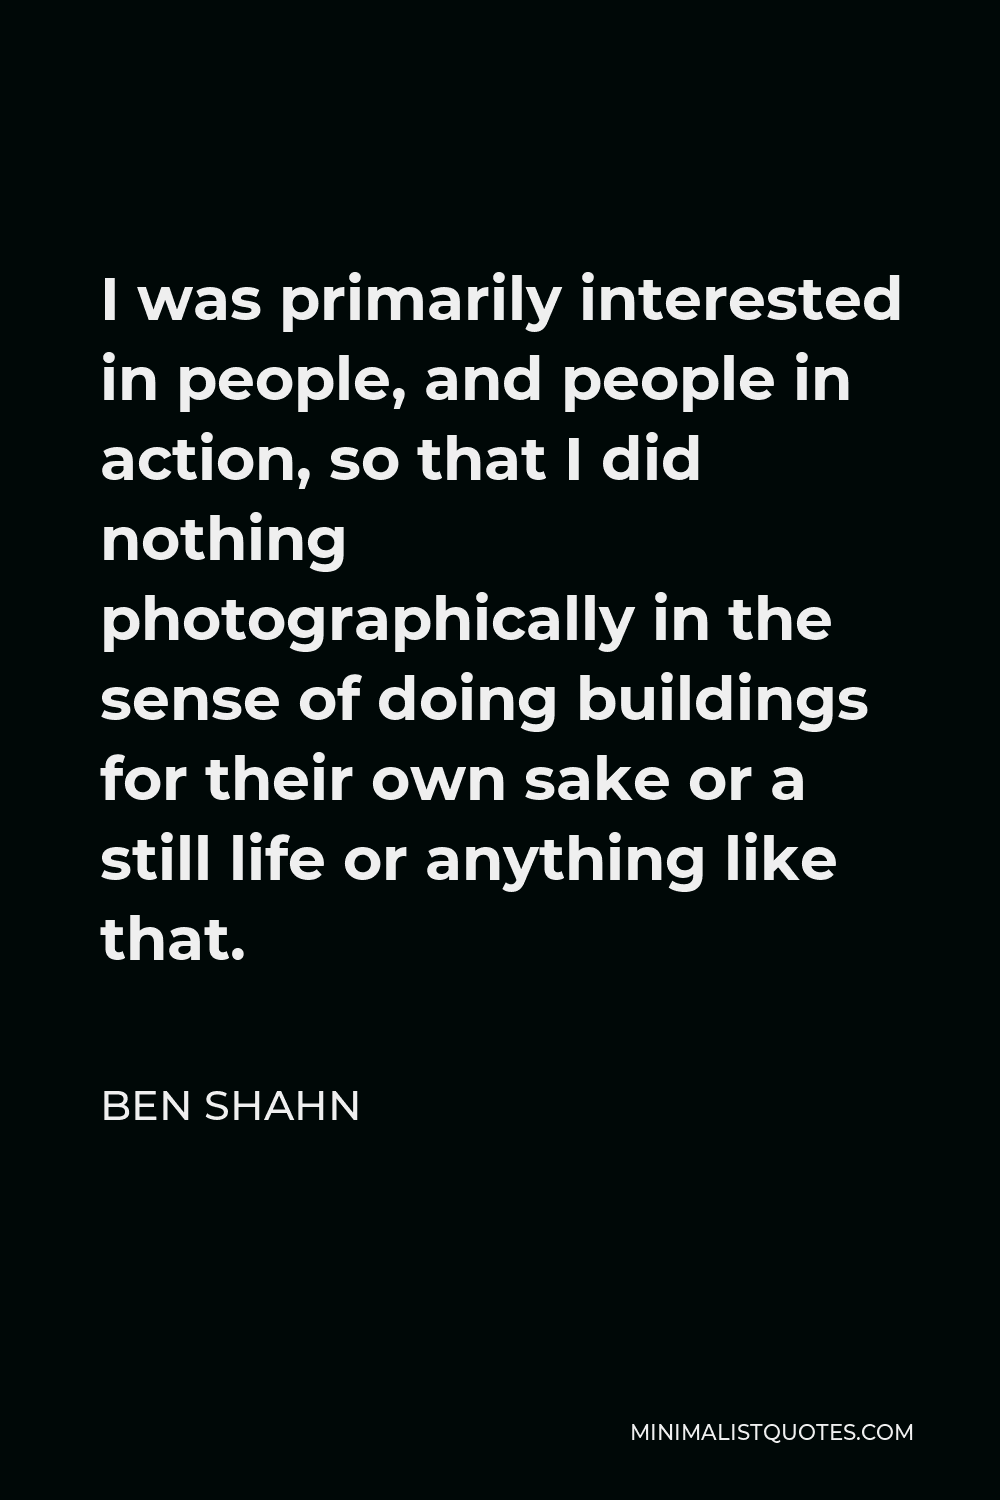 Ben Shahn Quote - I was primarily interested in people, and people in action, so that I did nothing photographically in the sense of doing buildings for their own sake or a still life or anything like that.